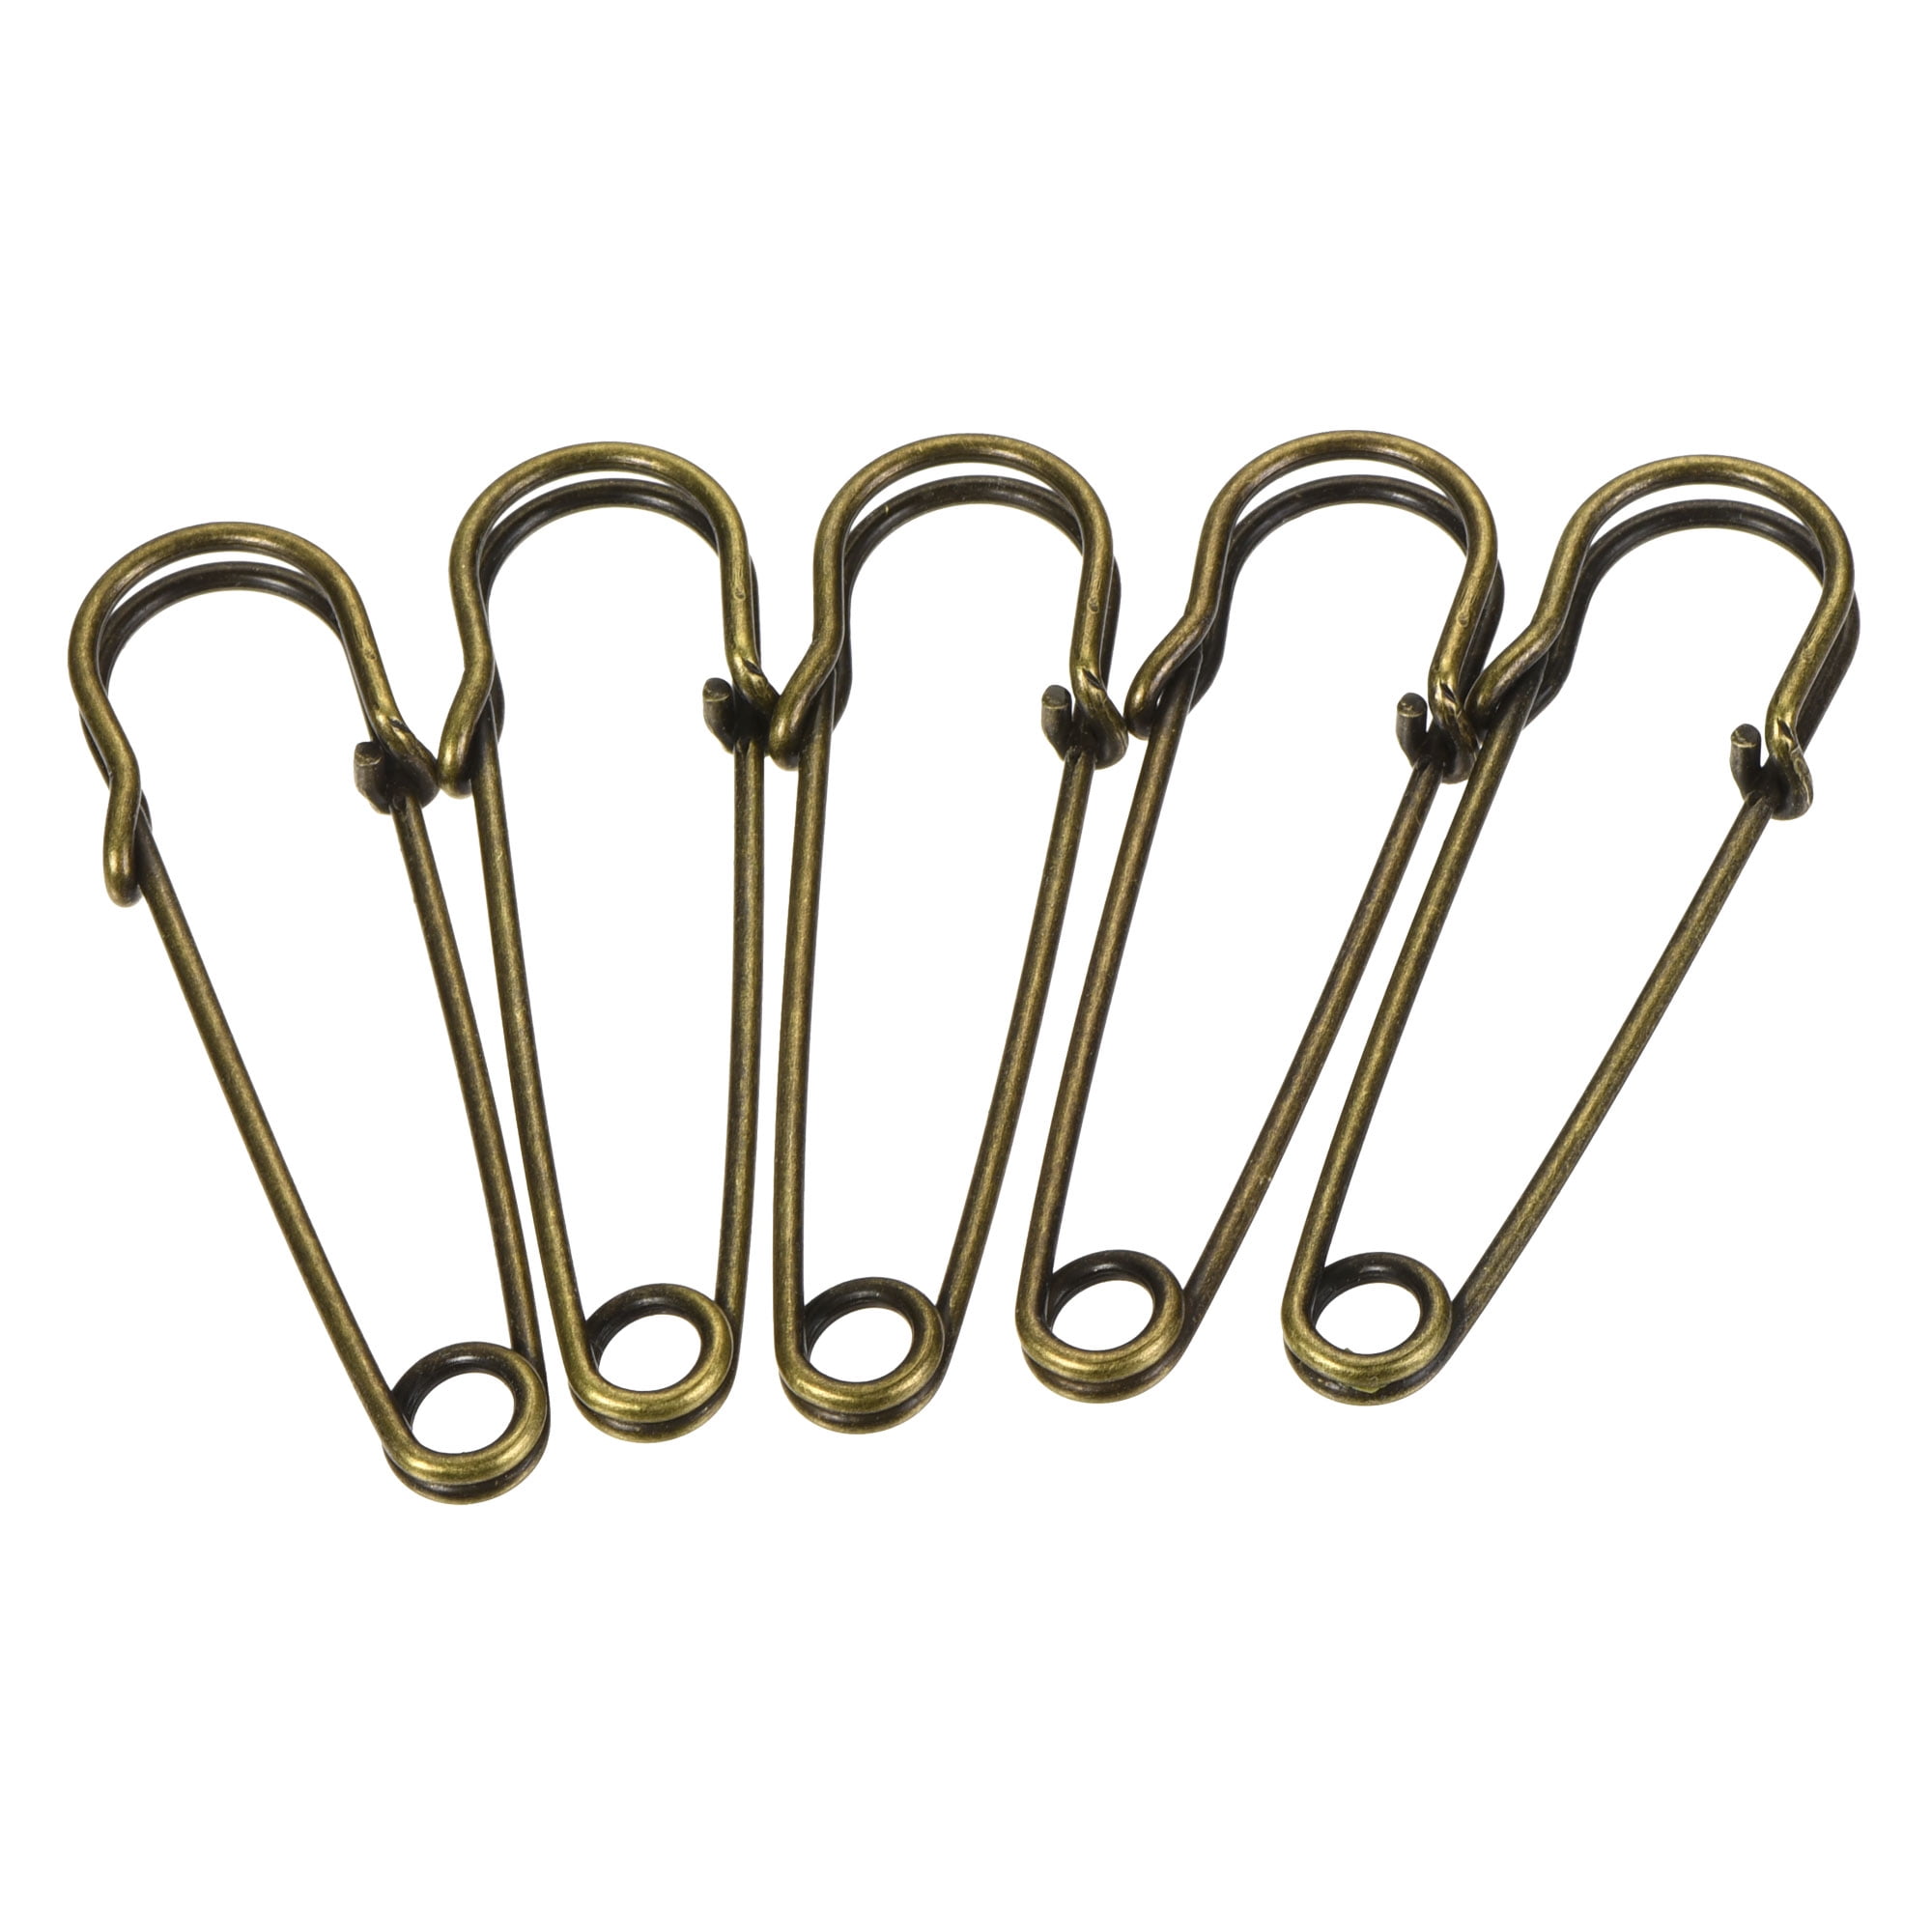 Hanycon 30 Pcs Extra Large Safety Pins, 3 Heavy Duty Steel Metal Lock Pin  Fasteners for Blankets, Skirts, Crafts, Kilts (Bronze)